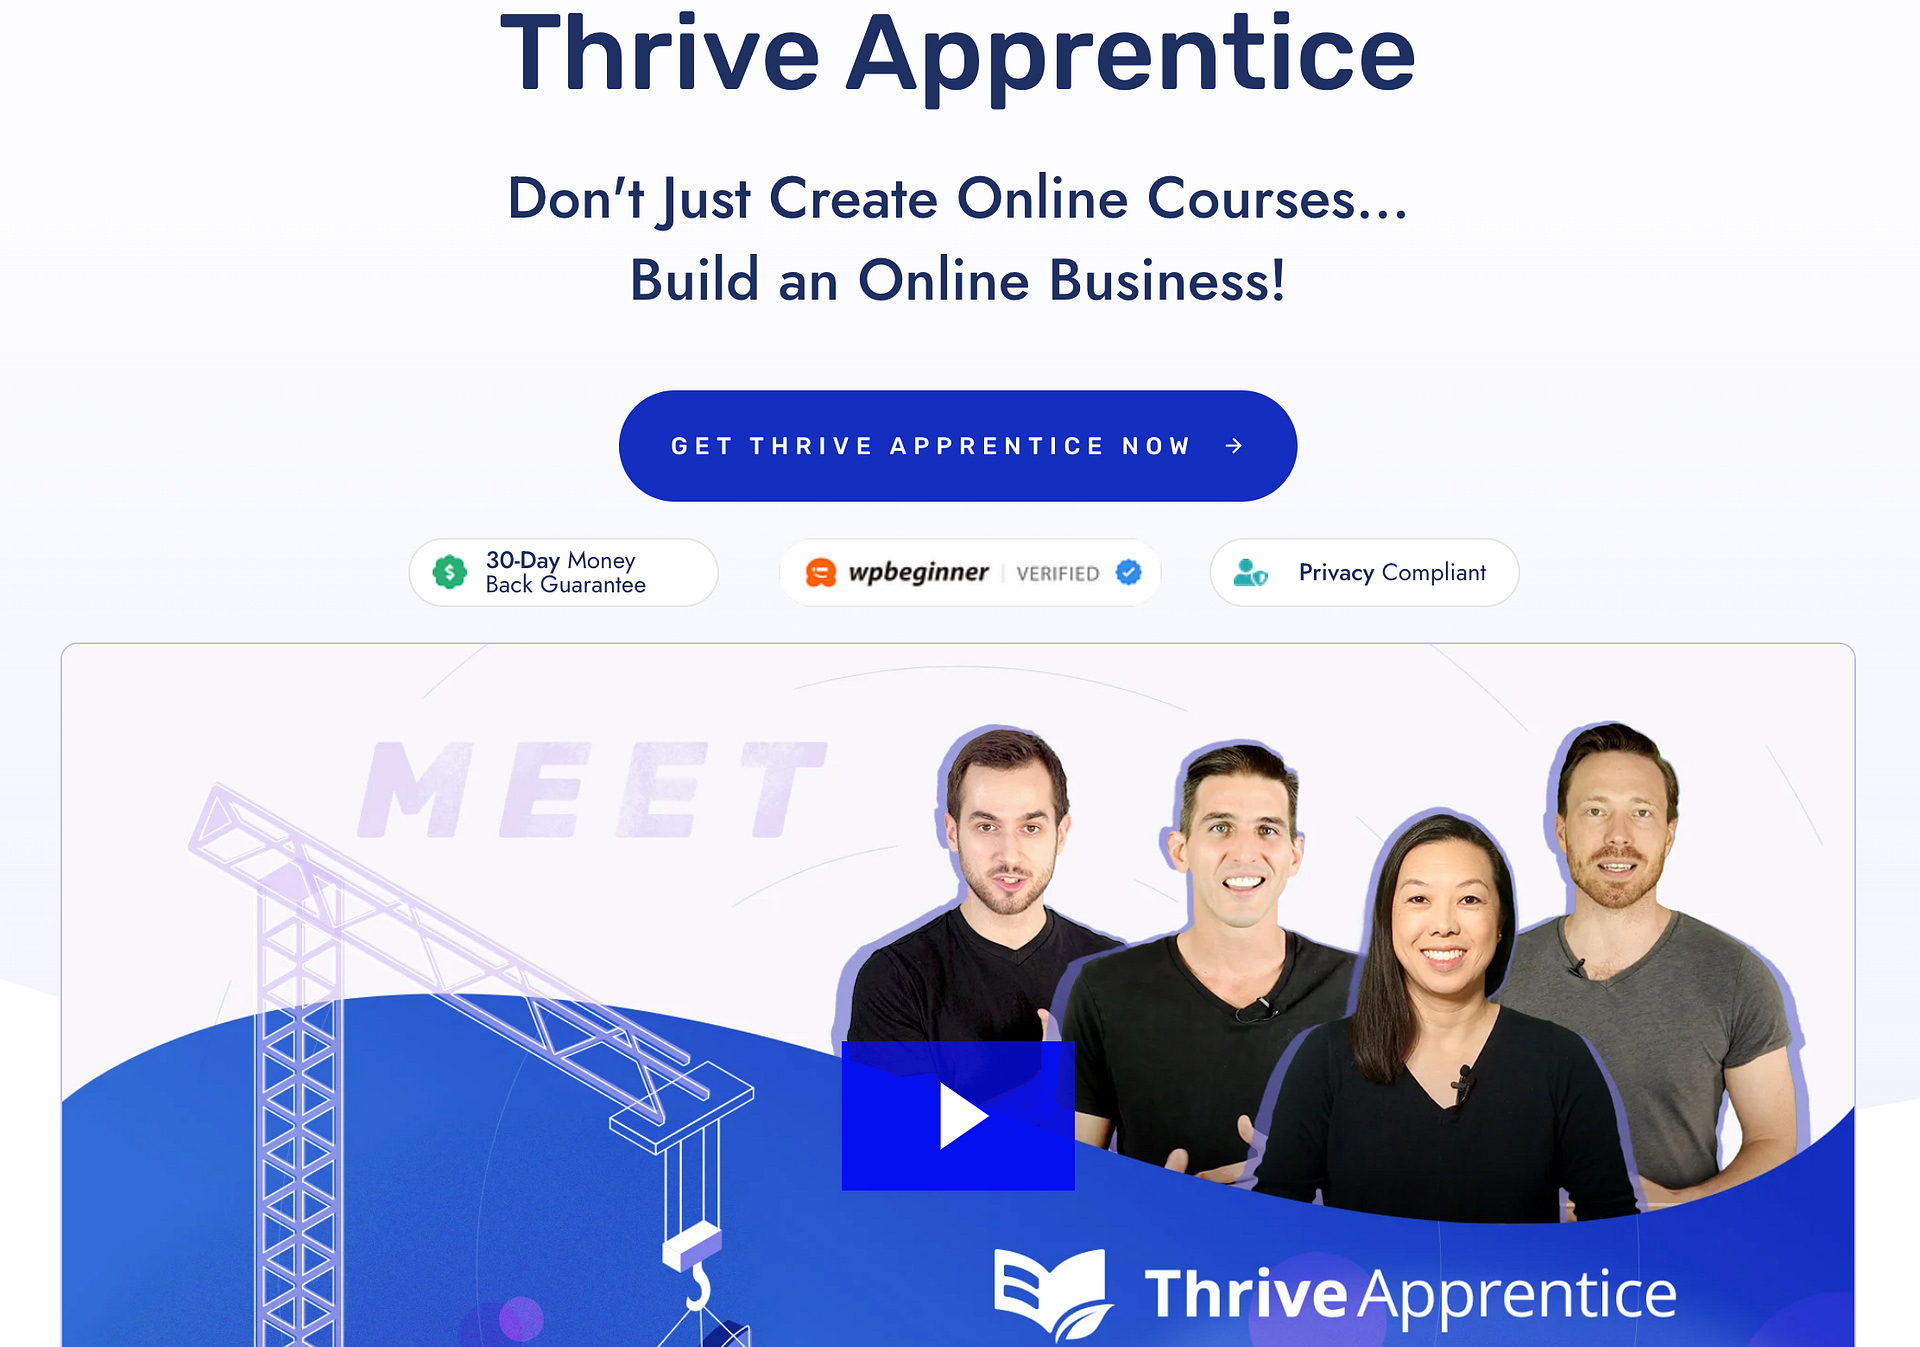 Thrive Apprentice sales page